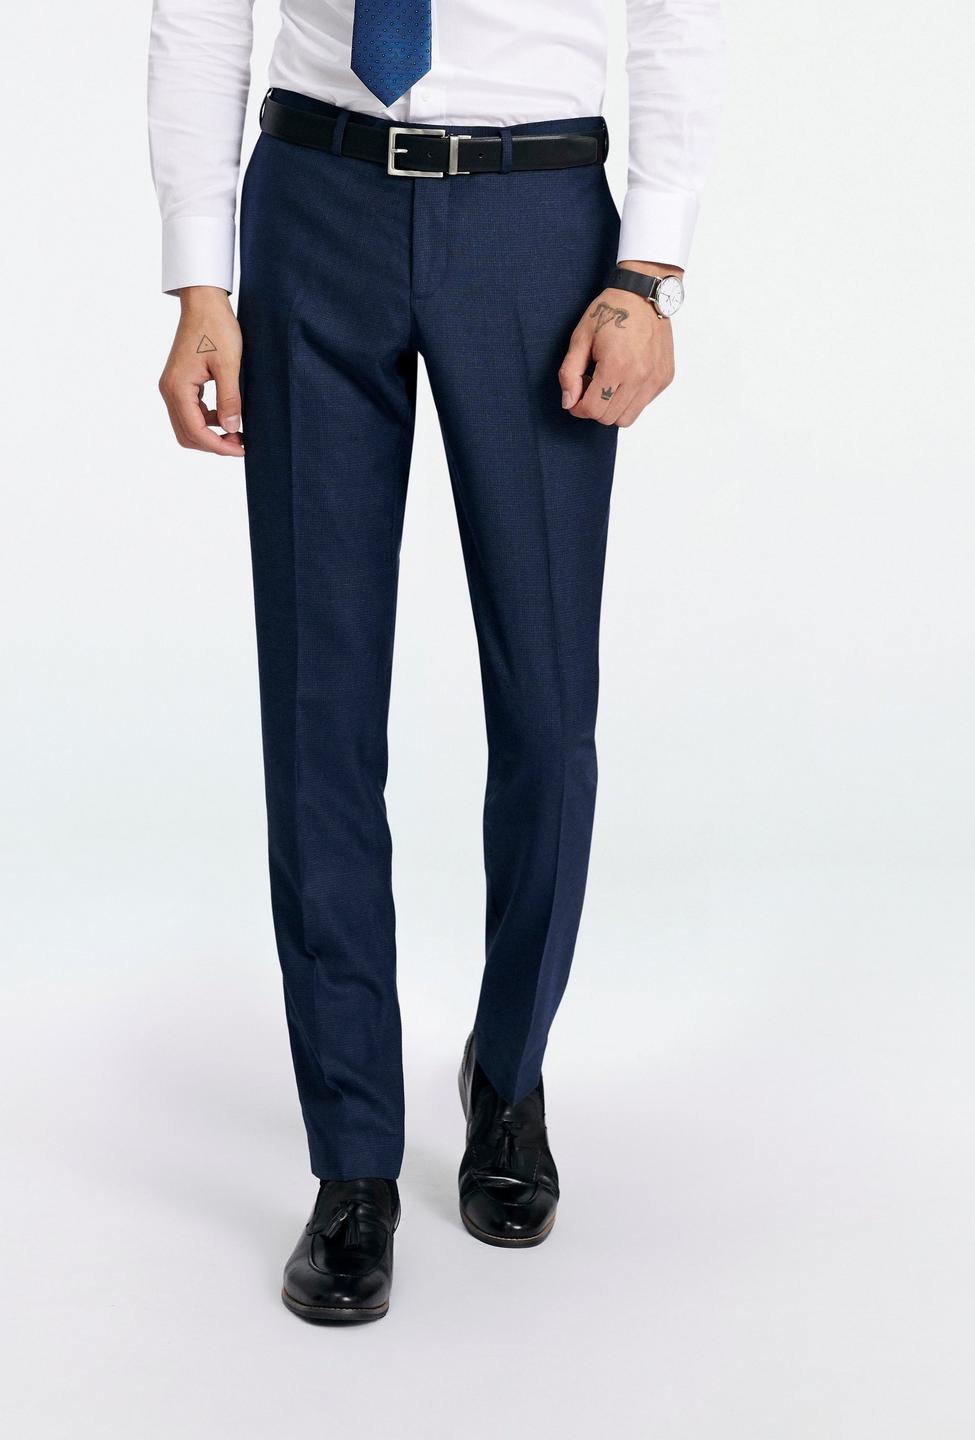 Blue pants - Bottsford Checked Design from Seasonal Indochino Collection